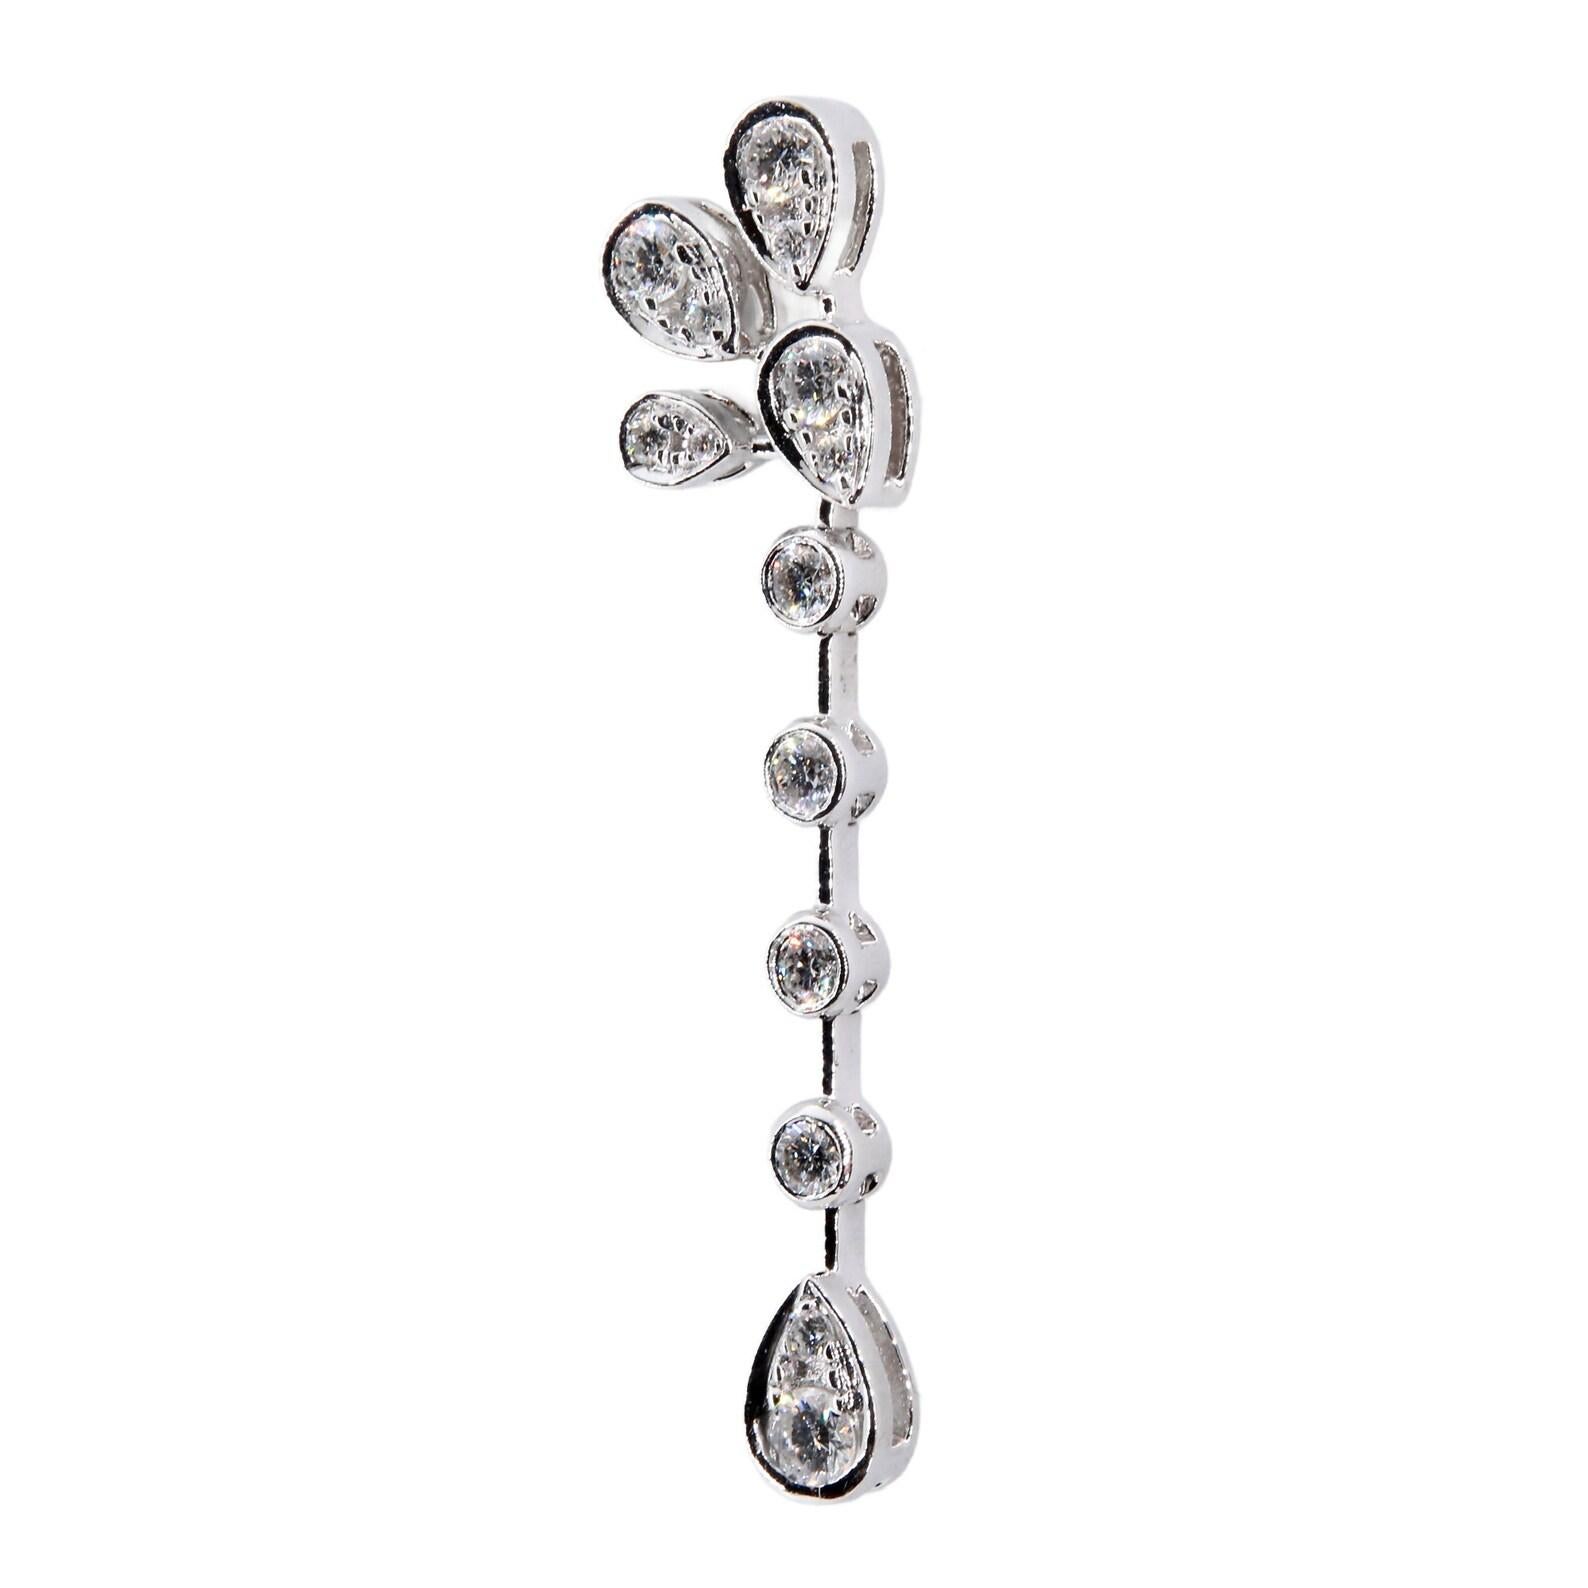 A pair of Chaumet diamond dangle earrings crafted in 18 karat white gold. From the Josephine Aigrette Impériale collection, these beautiful earrings are set with 2.10 carats of round brilliant cut diamonds. Diamonds grade as G color, VS